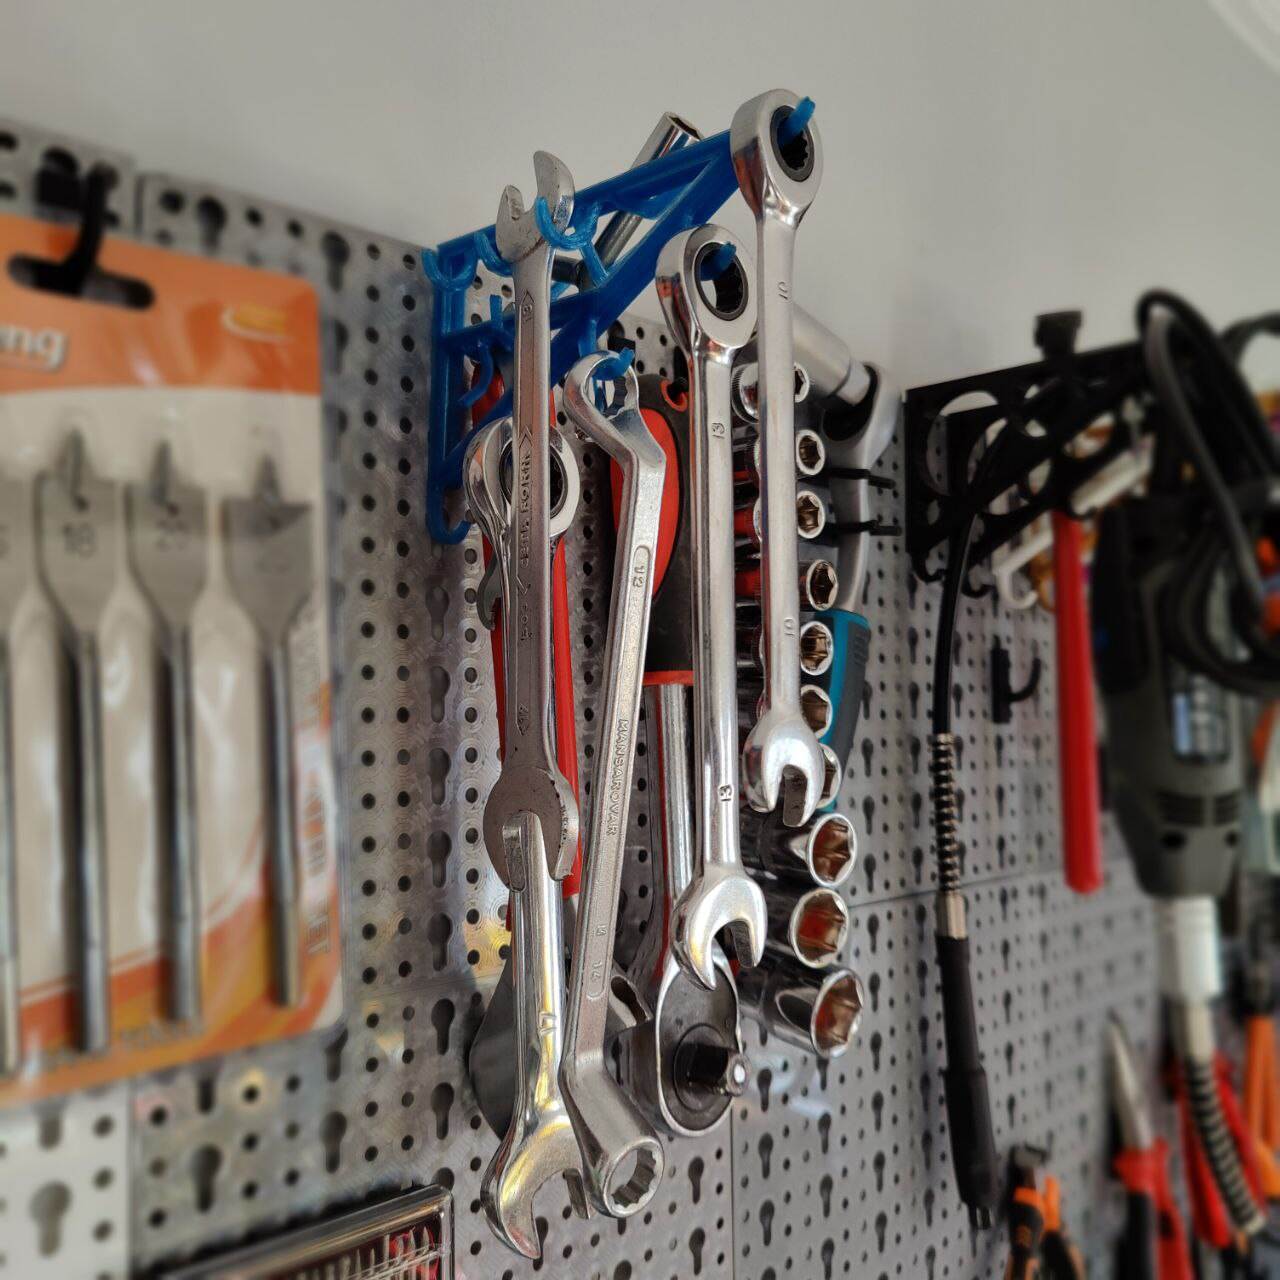 PEGBOARD (TOOL PANEL) KIT WITH A VARIETY OF TOOLS-5